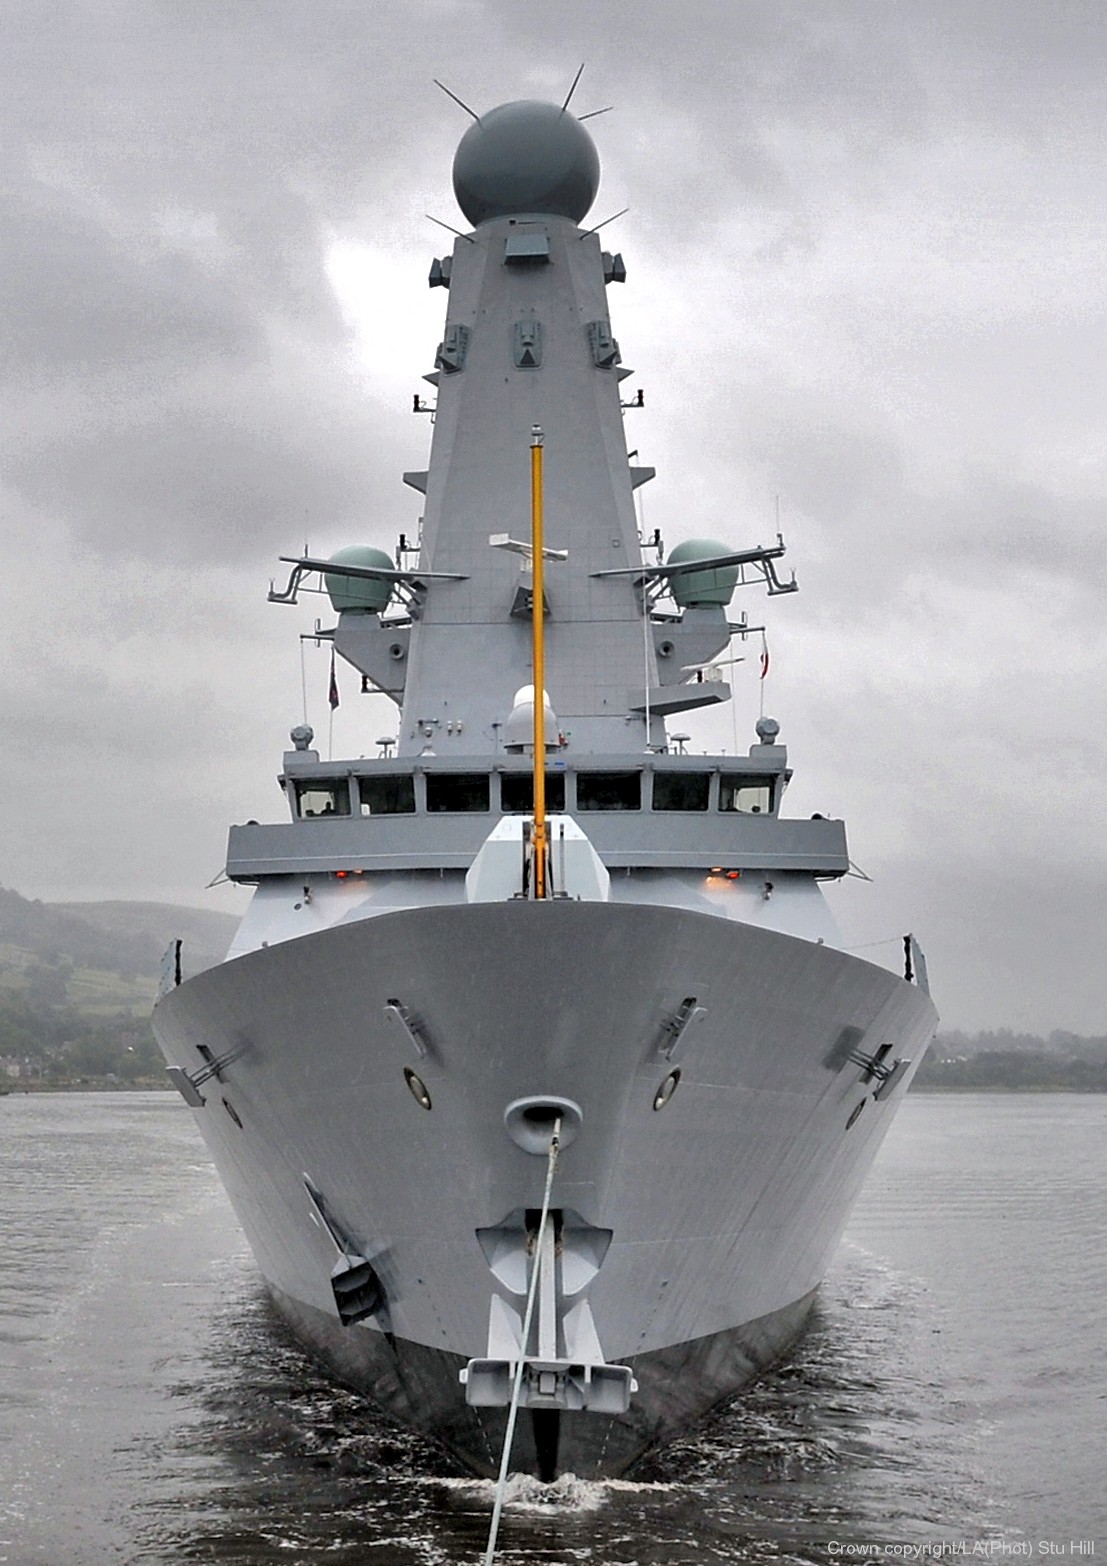 d37 hms duncan d-37 type 45 daring class guided missile destroyer ddg royal navy sea viper 09